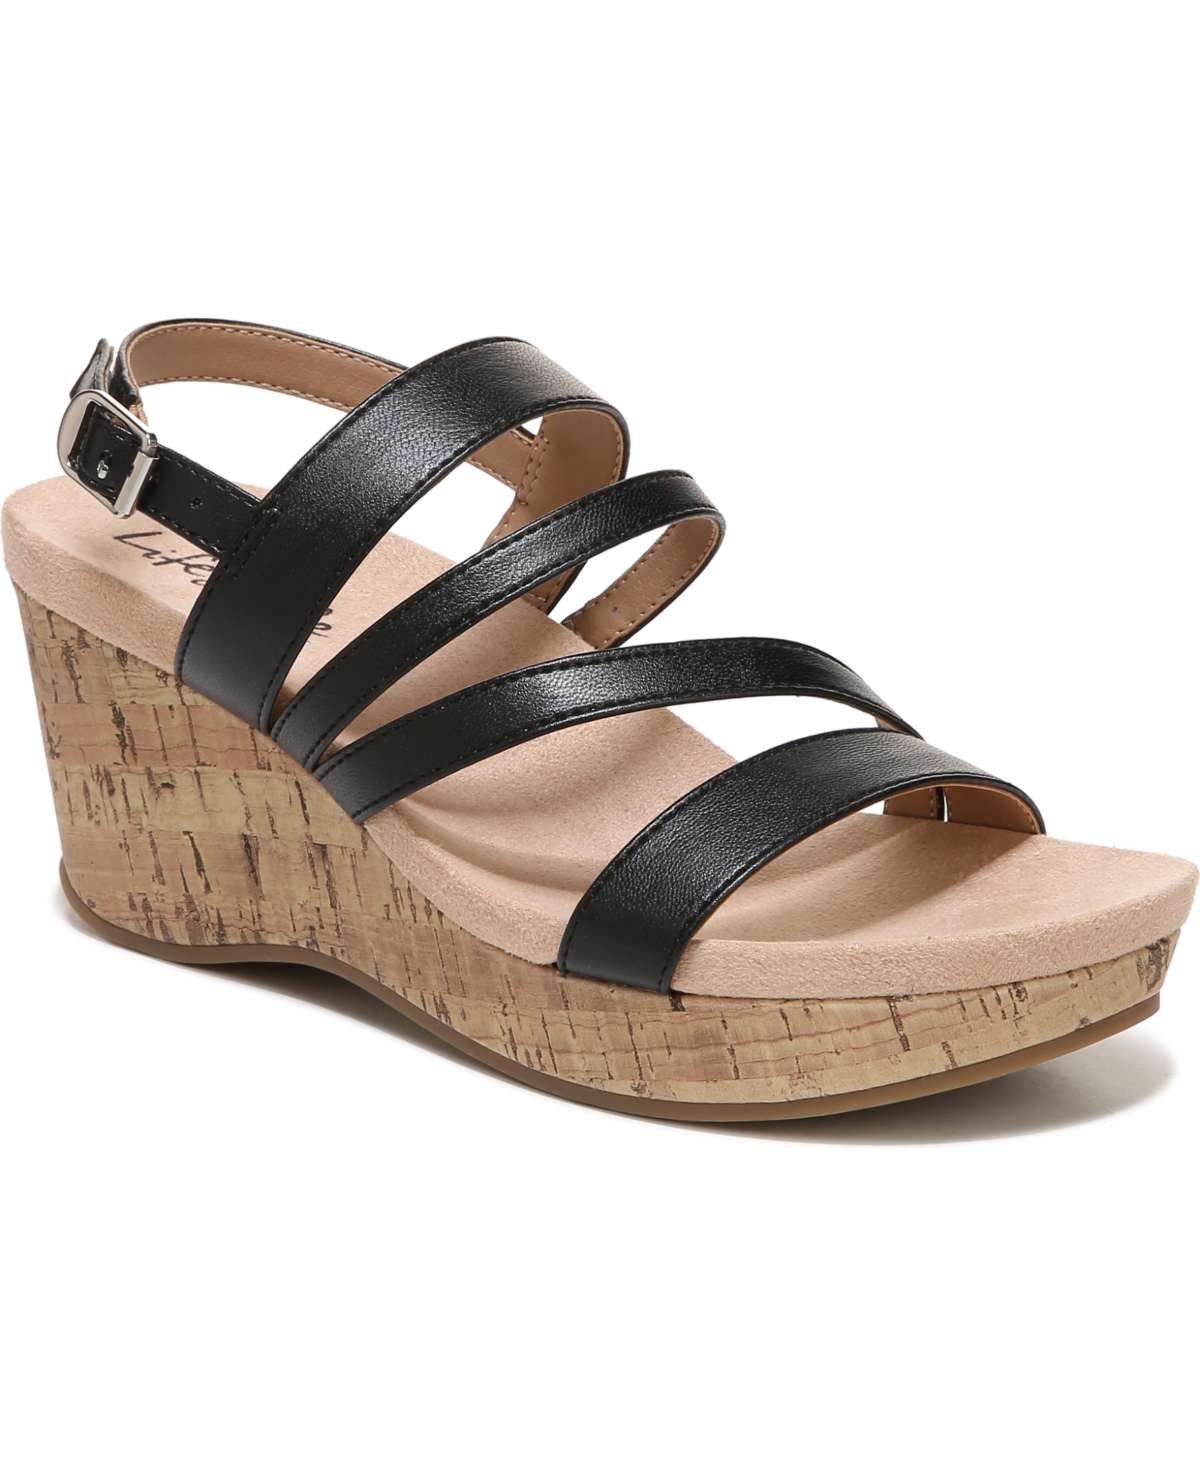 LIFESTRIDE DISCOVER STRAPPY WEDGE SANDALS